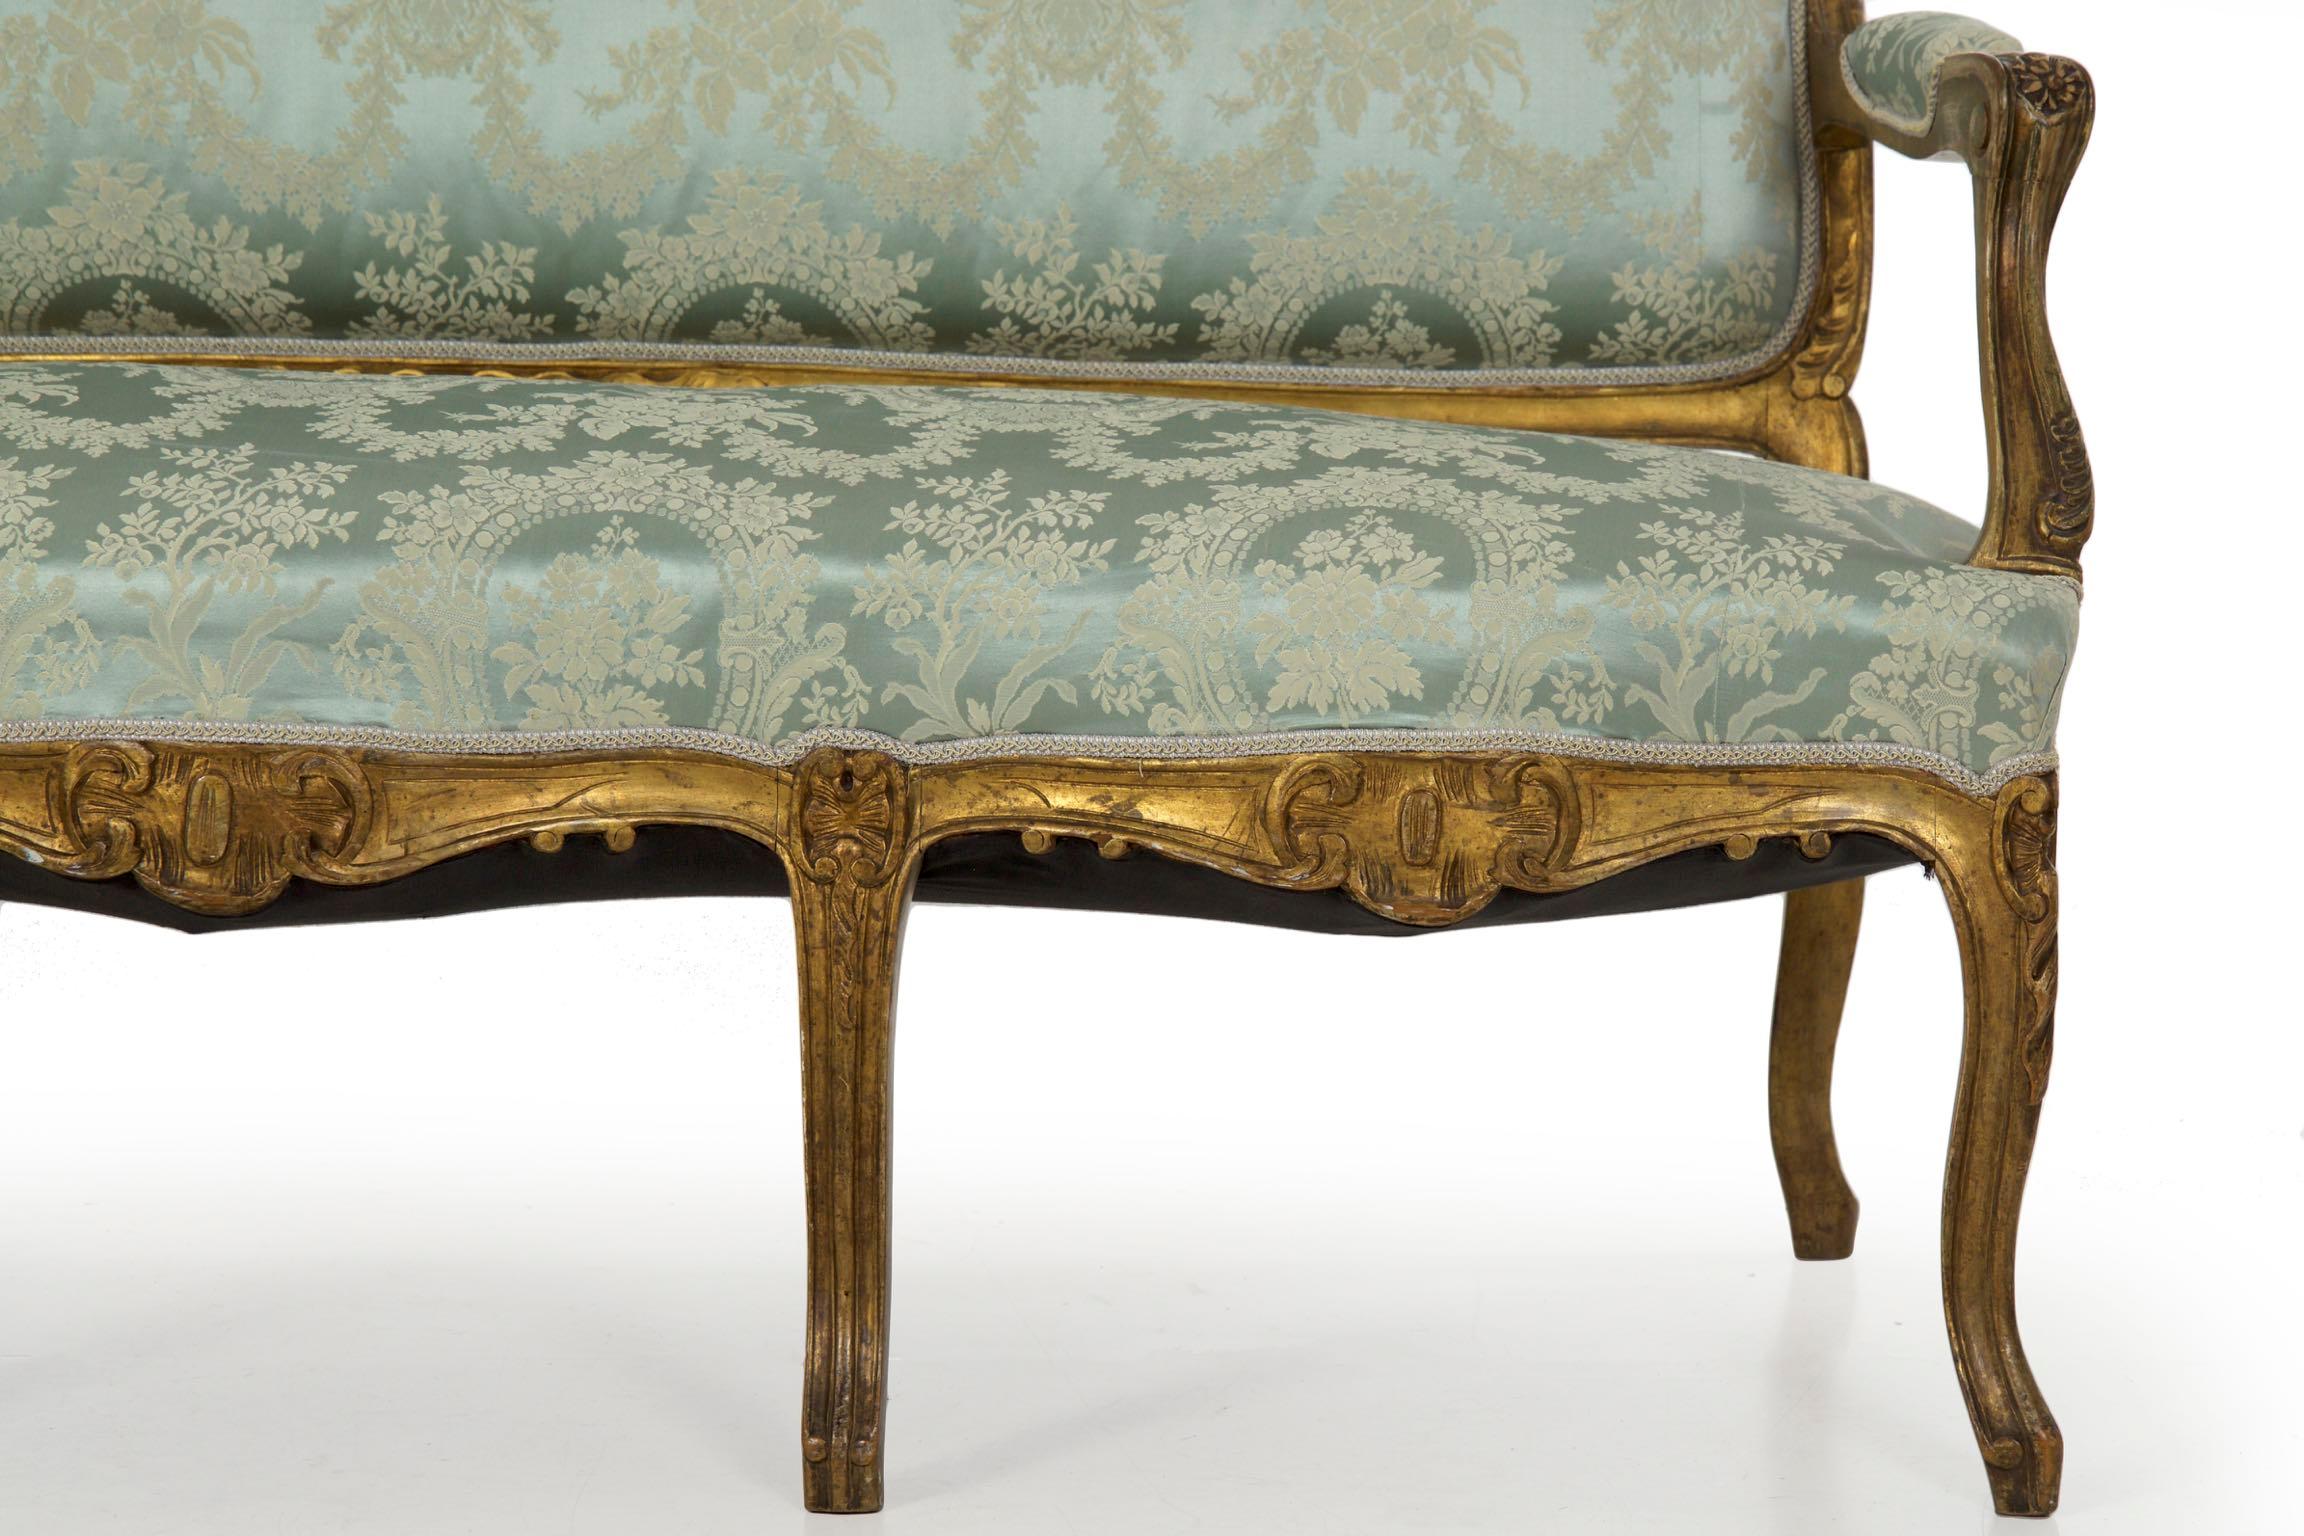 Damask French Louis XV Style Giltwood Antique Settee Sofa in Blue Silk